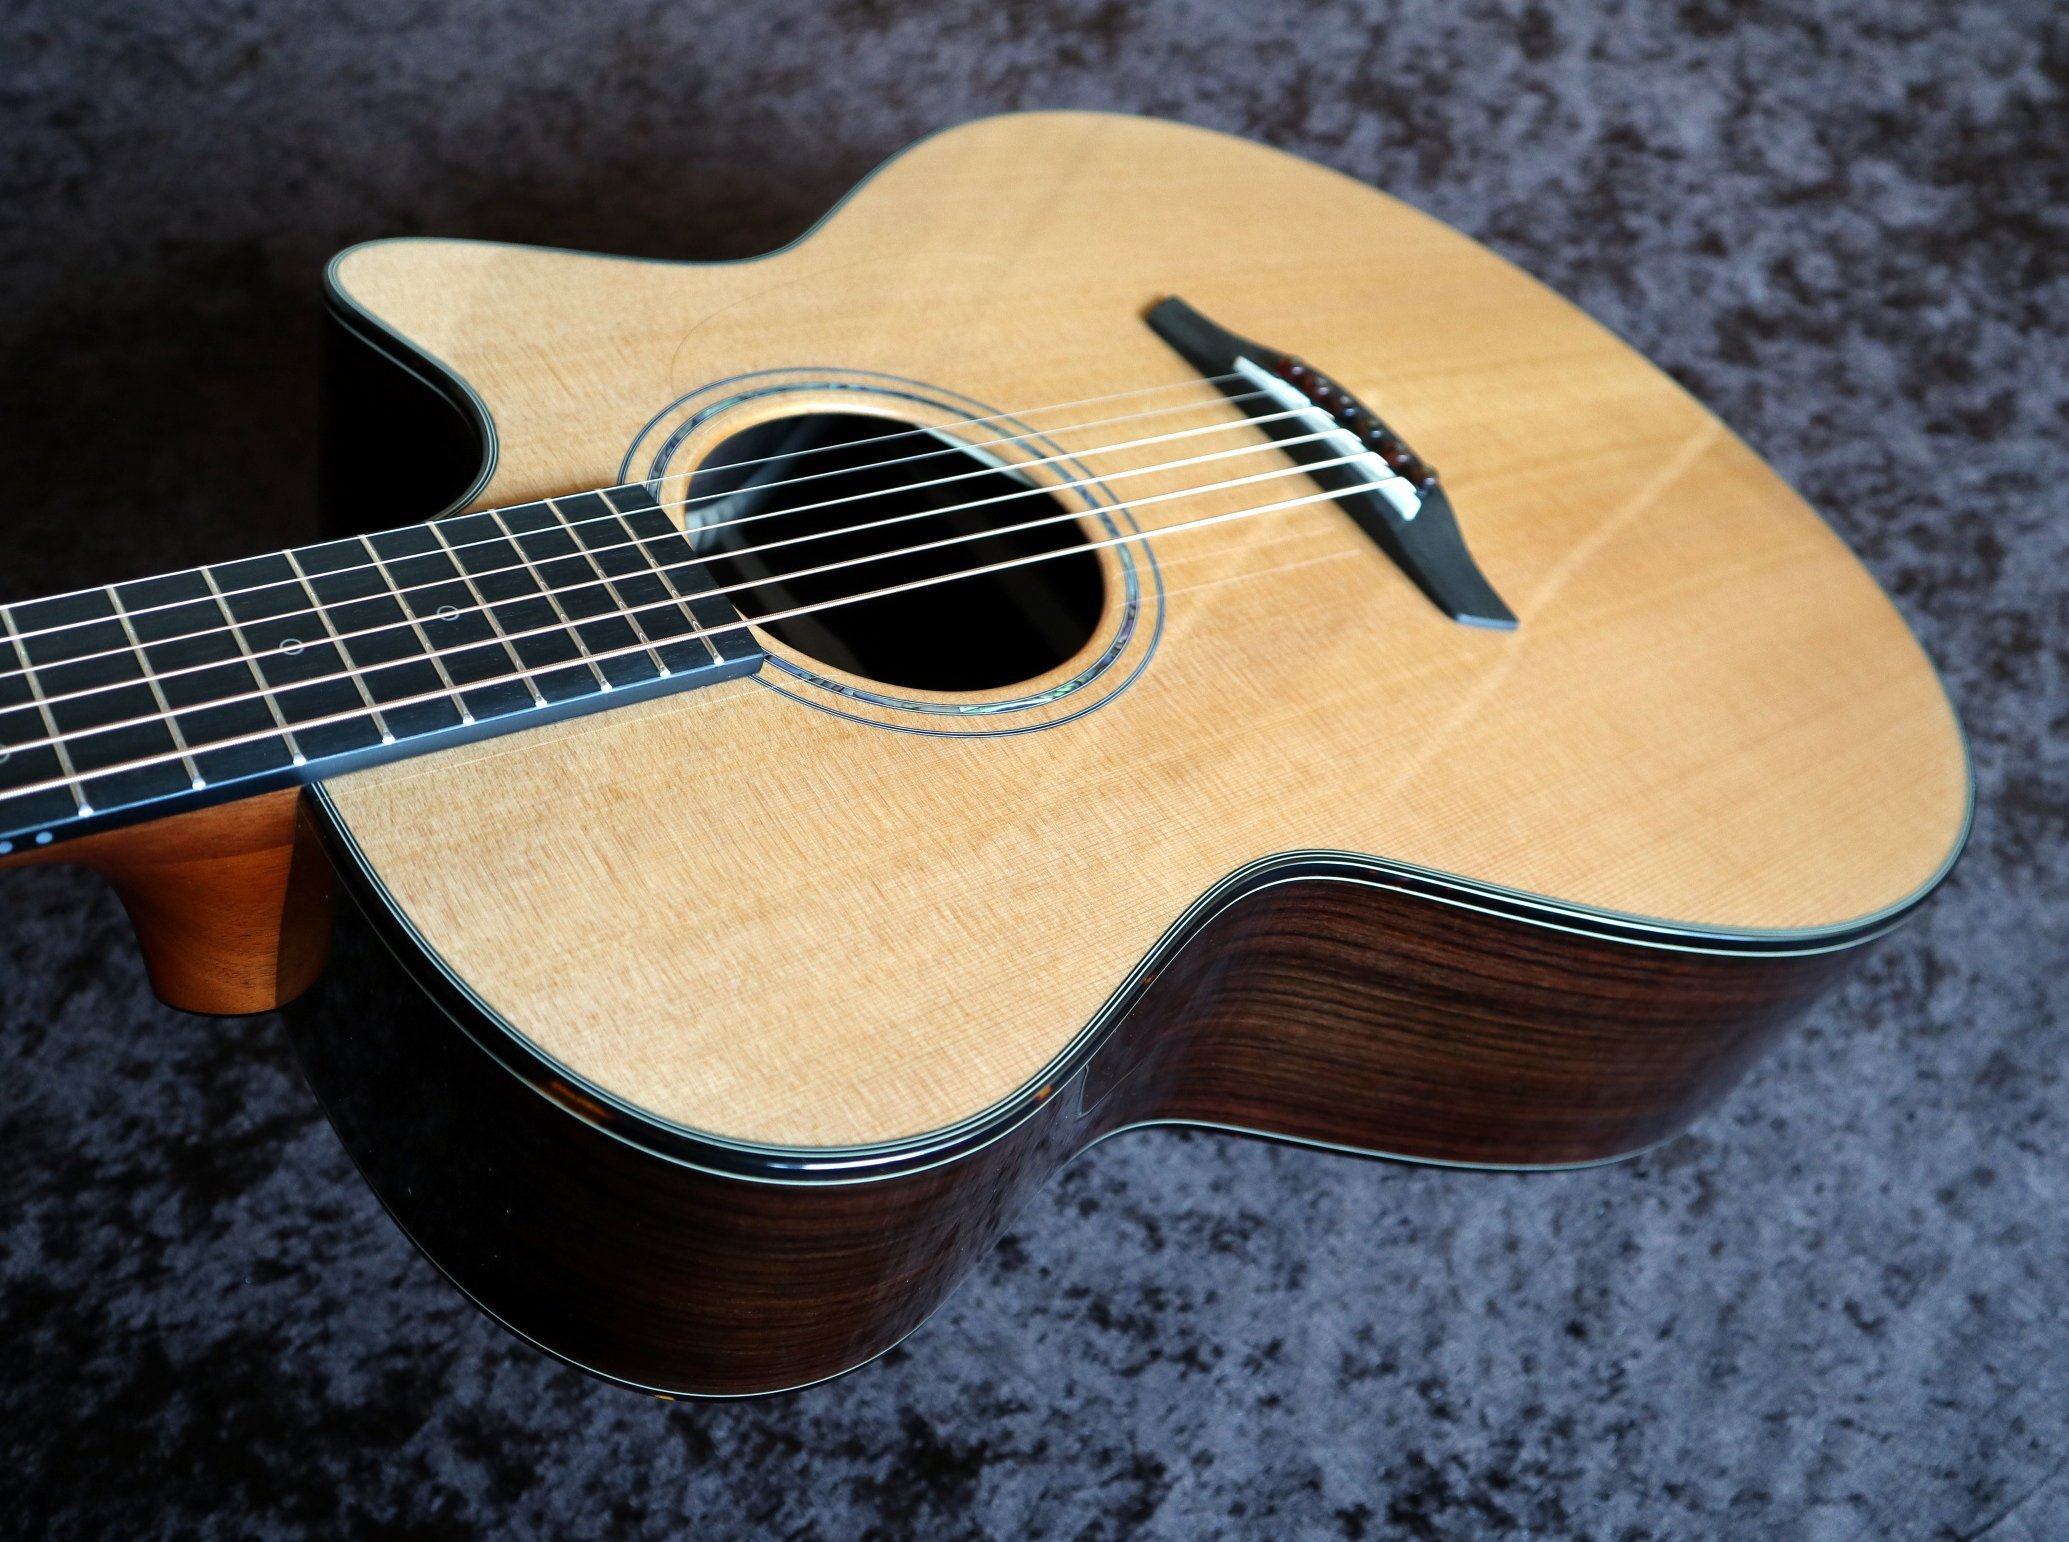 Furch Yellow Gc-CR 12 String Acoustic Guitar Including UK Exclusive Inlays & Over £100 Of Added Value FREE, Acoustic Guitar for sale at Richards Guitars.